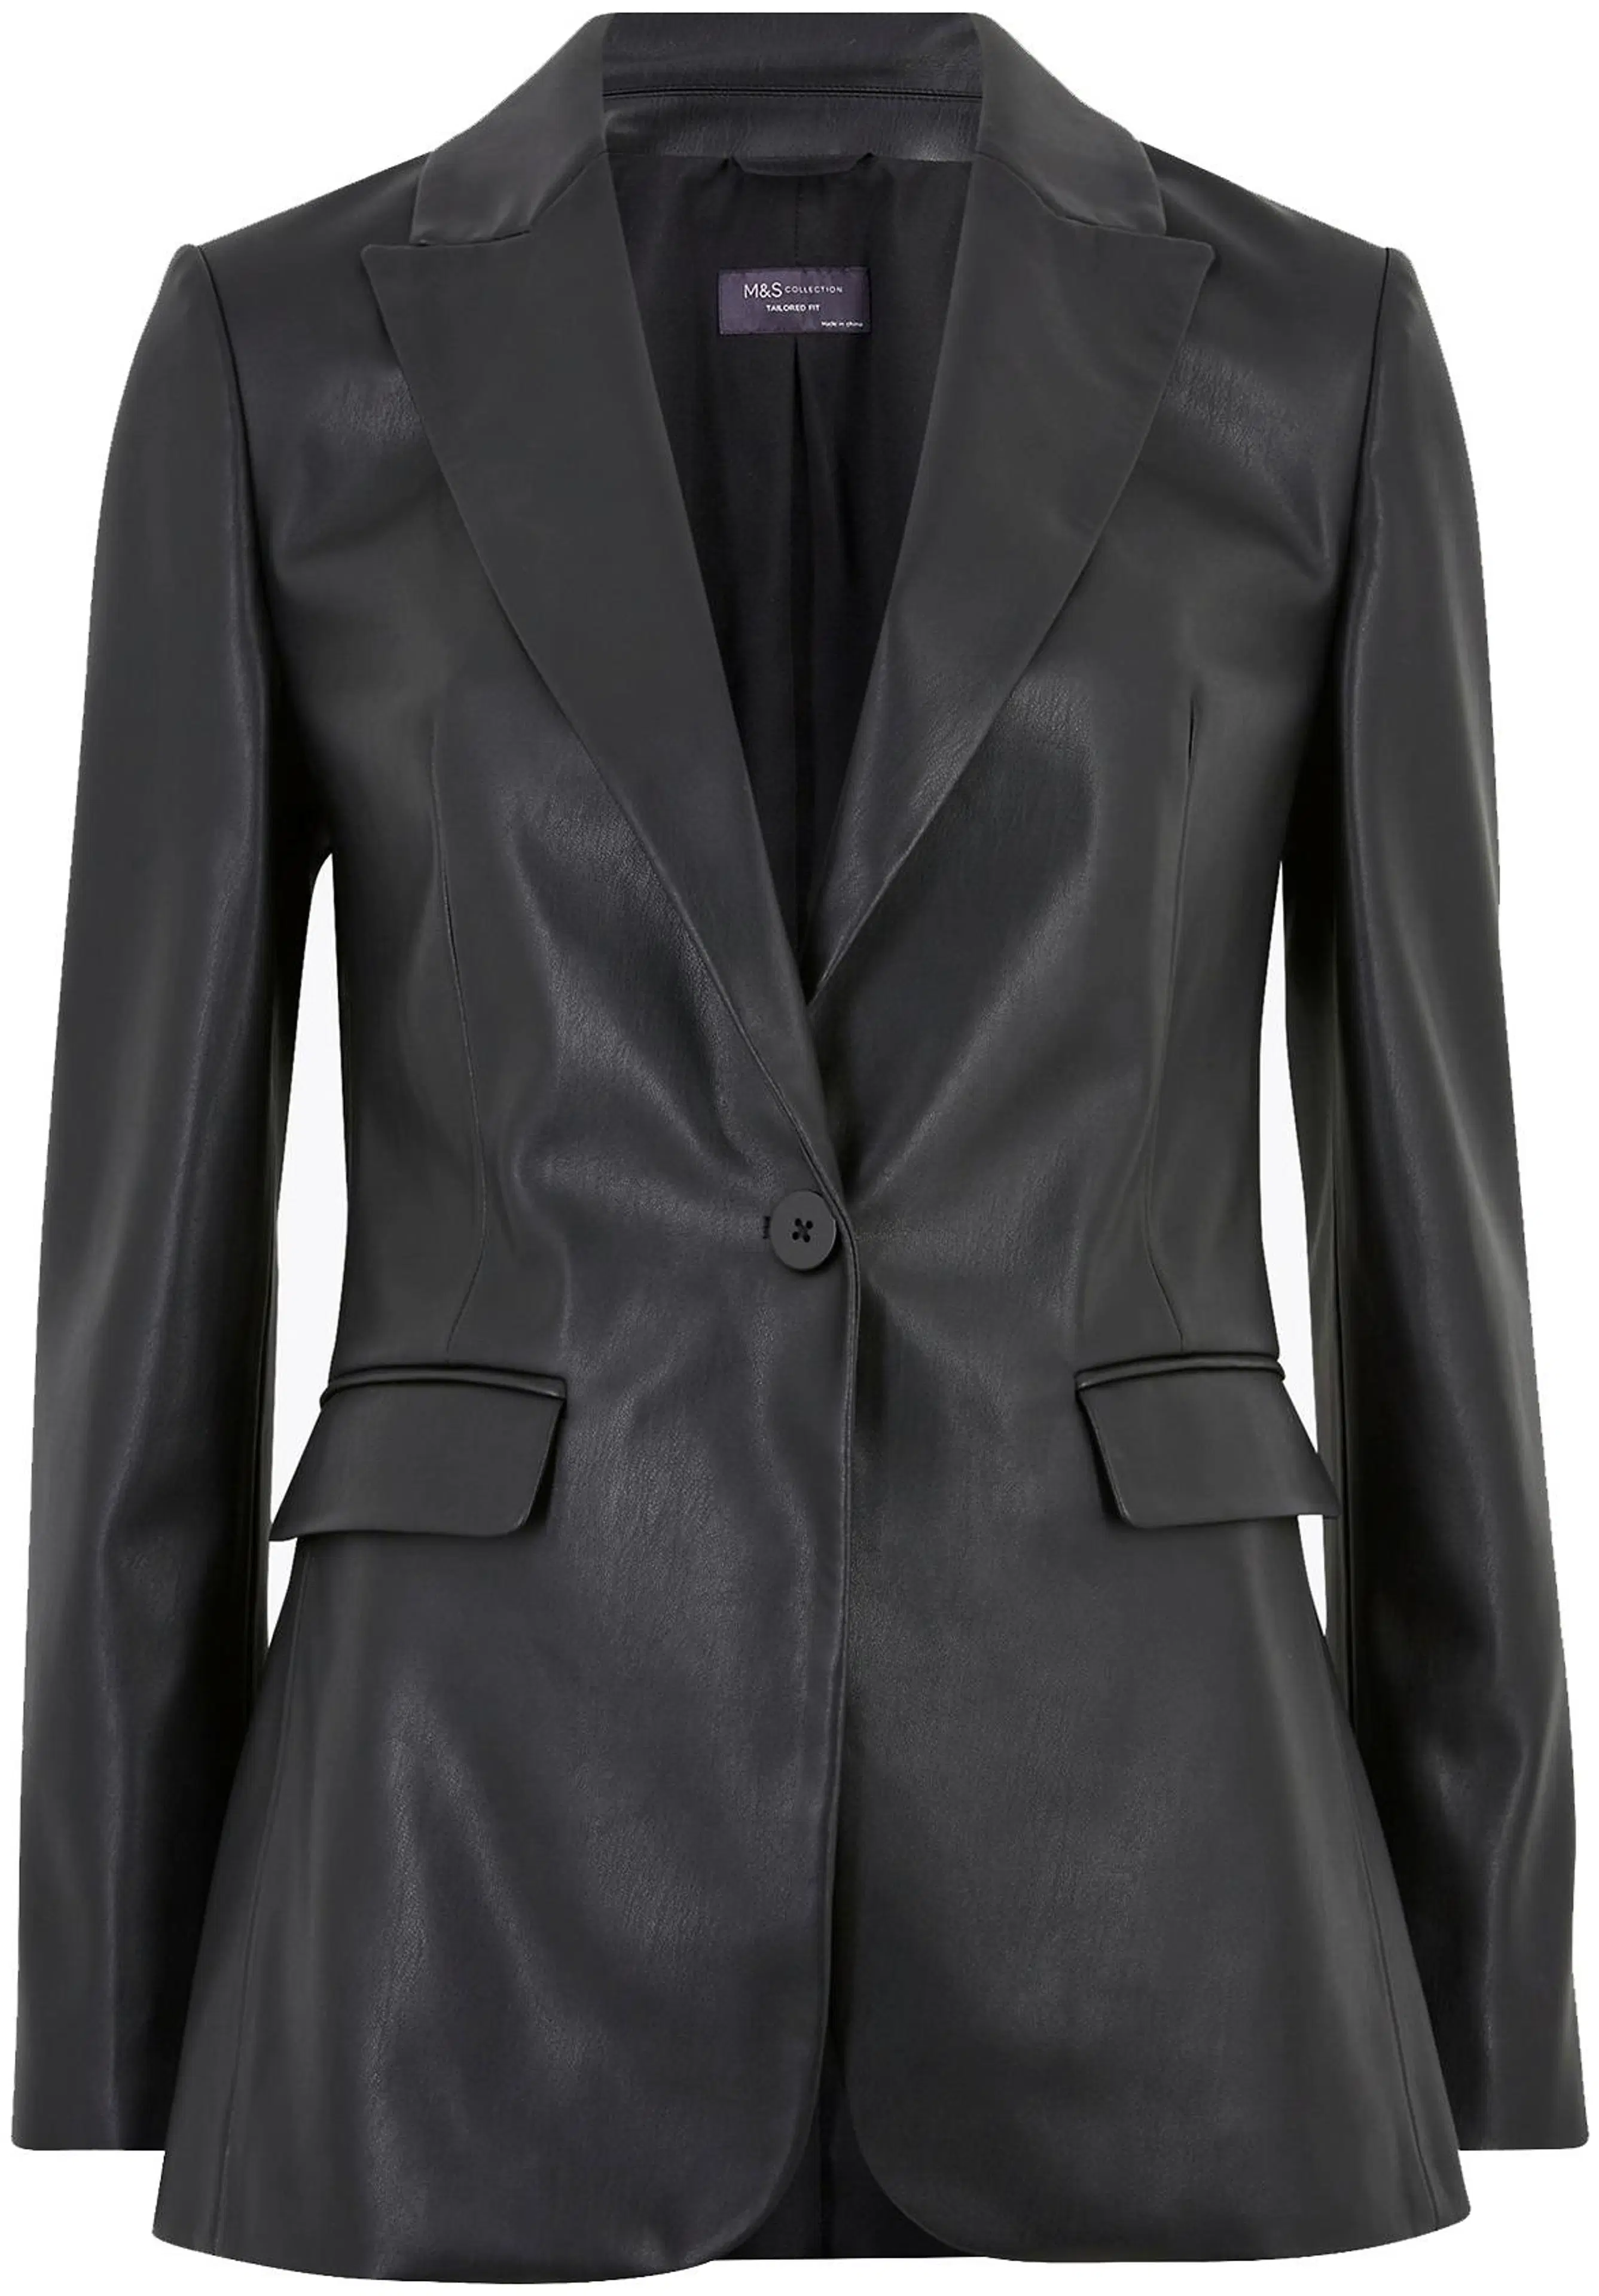 M&S Faux Leather Tailored Bleiseri